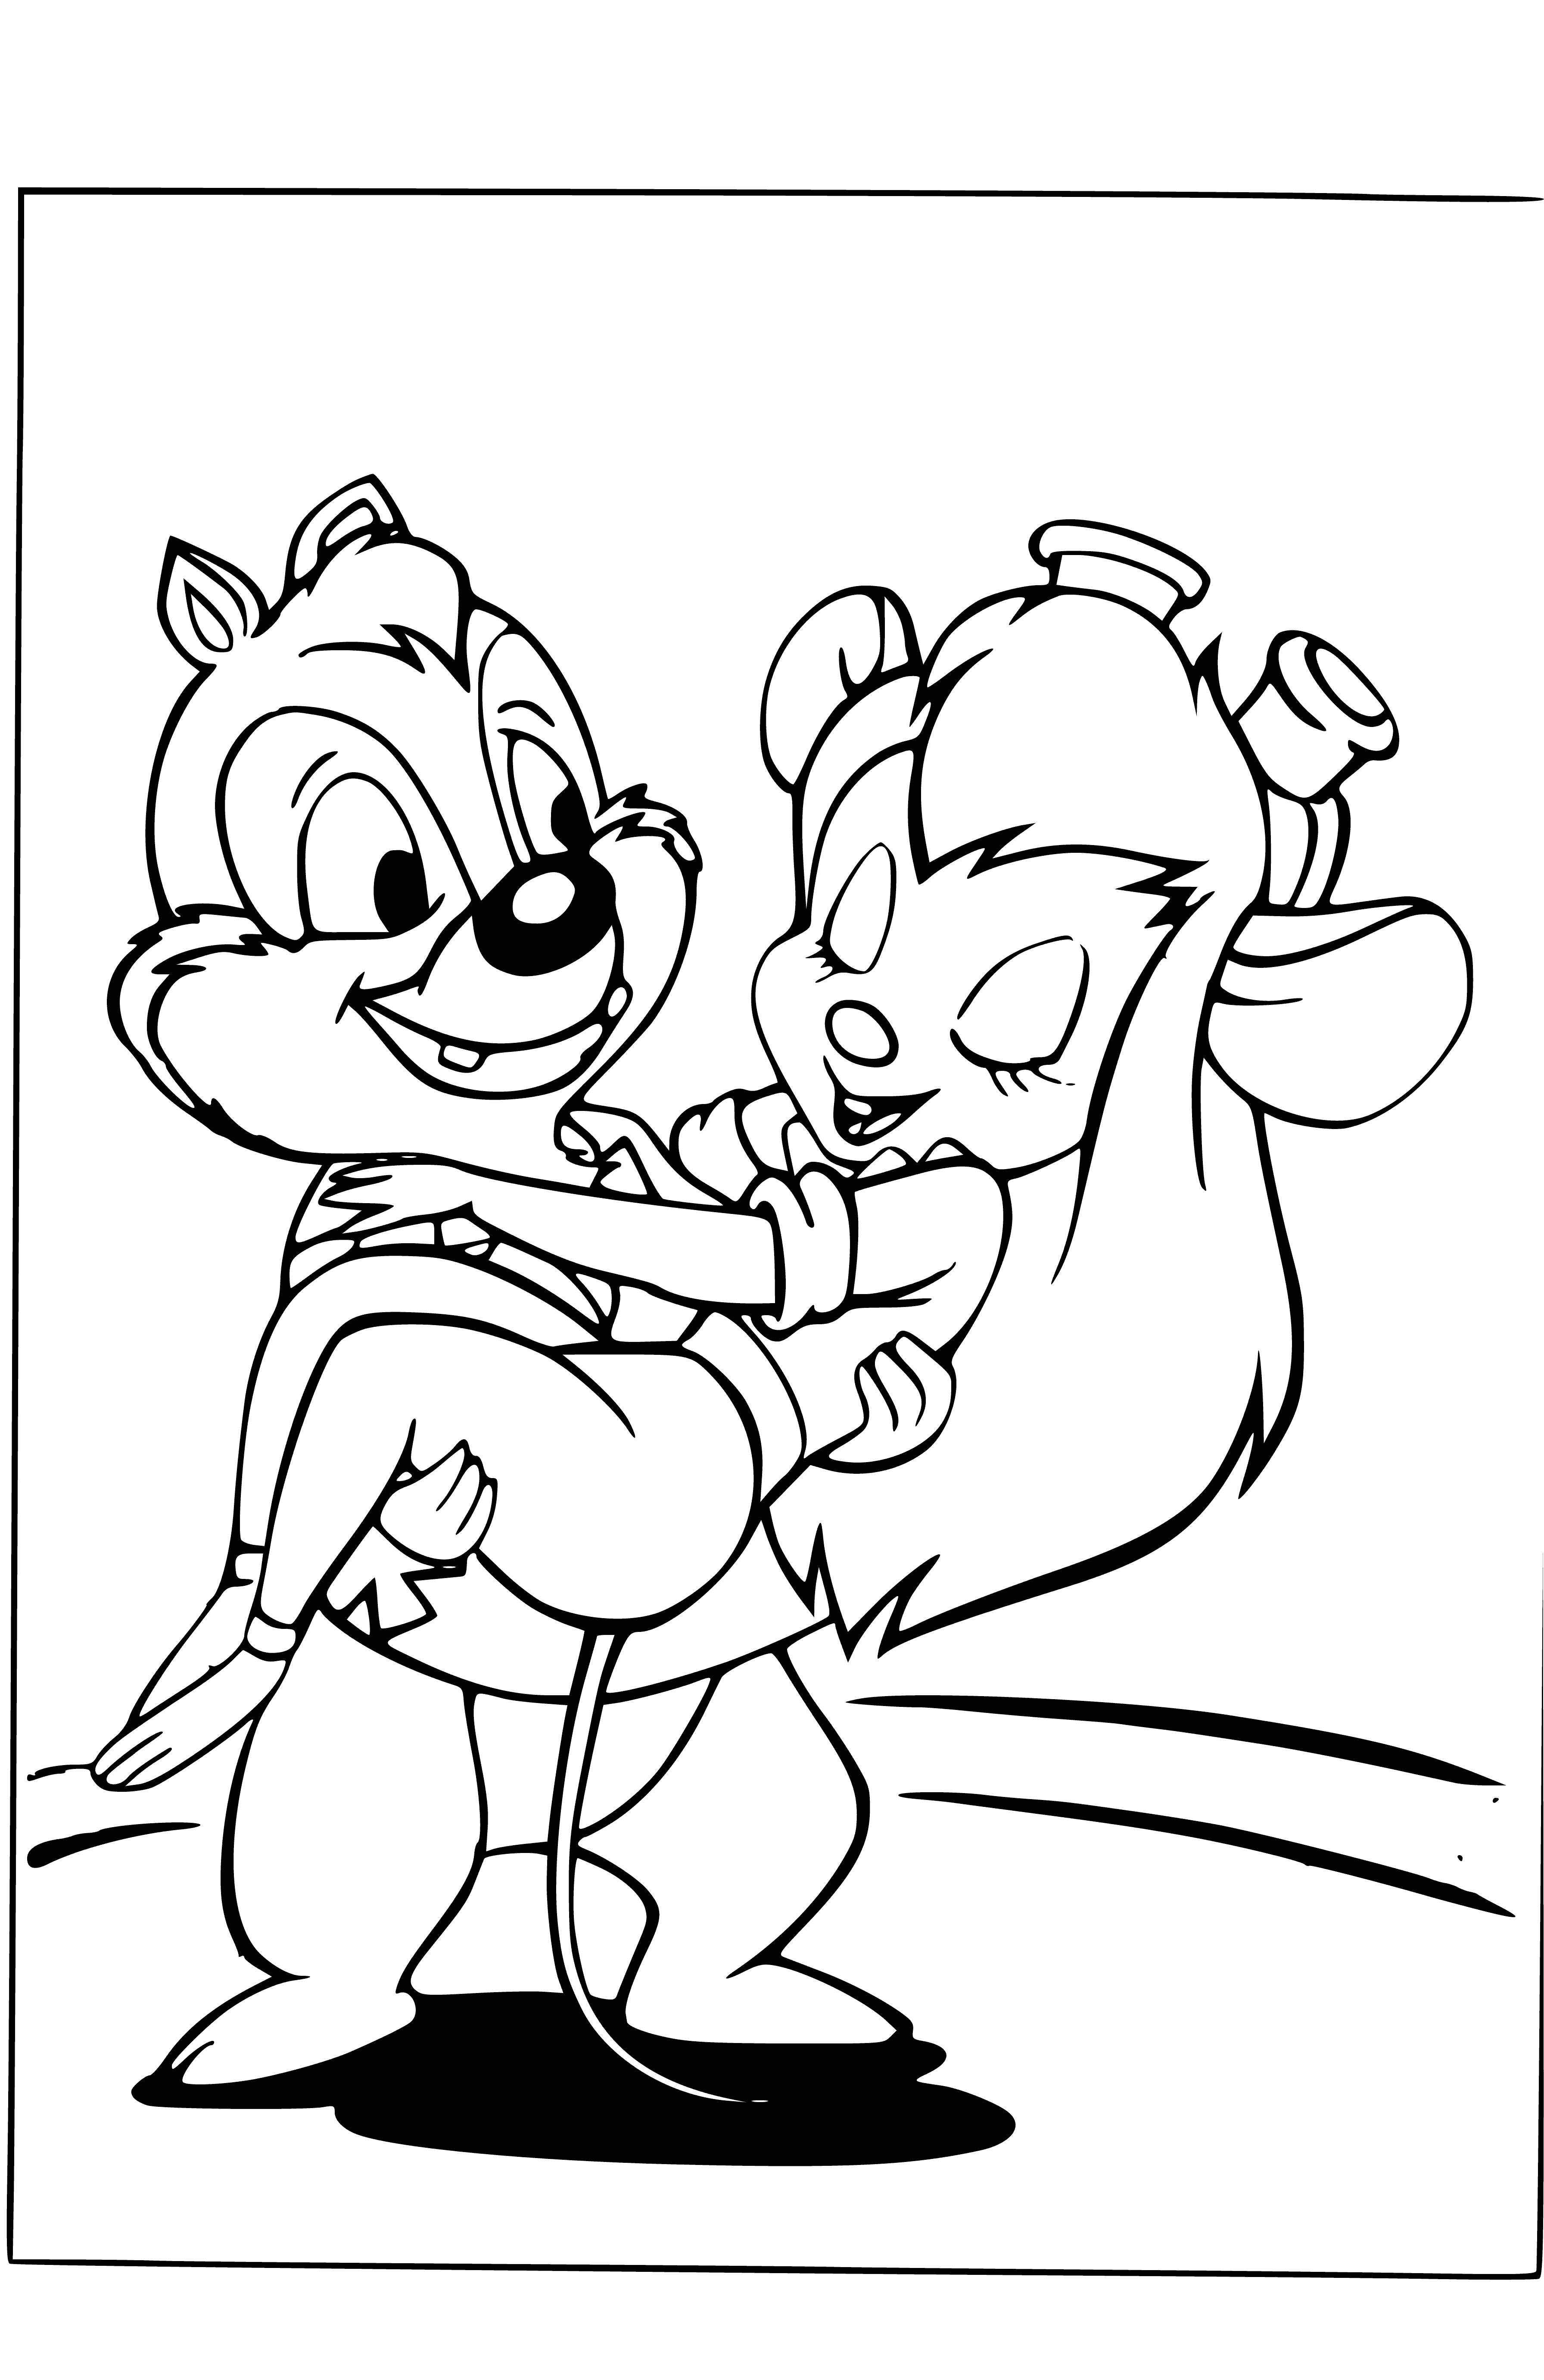 coloring page: 2 mice, 1 brown/white, 1 gray/white, both have black eyes/nose & standing on hind legs, tails curled around.